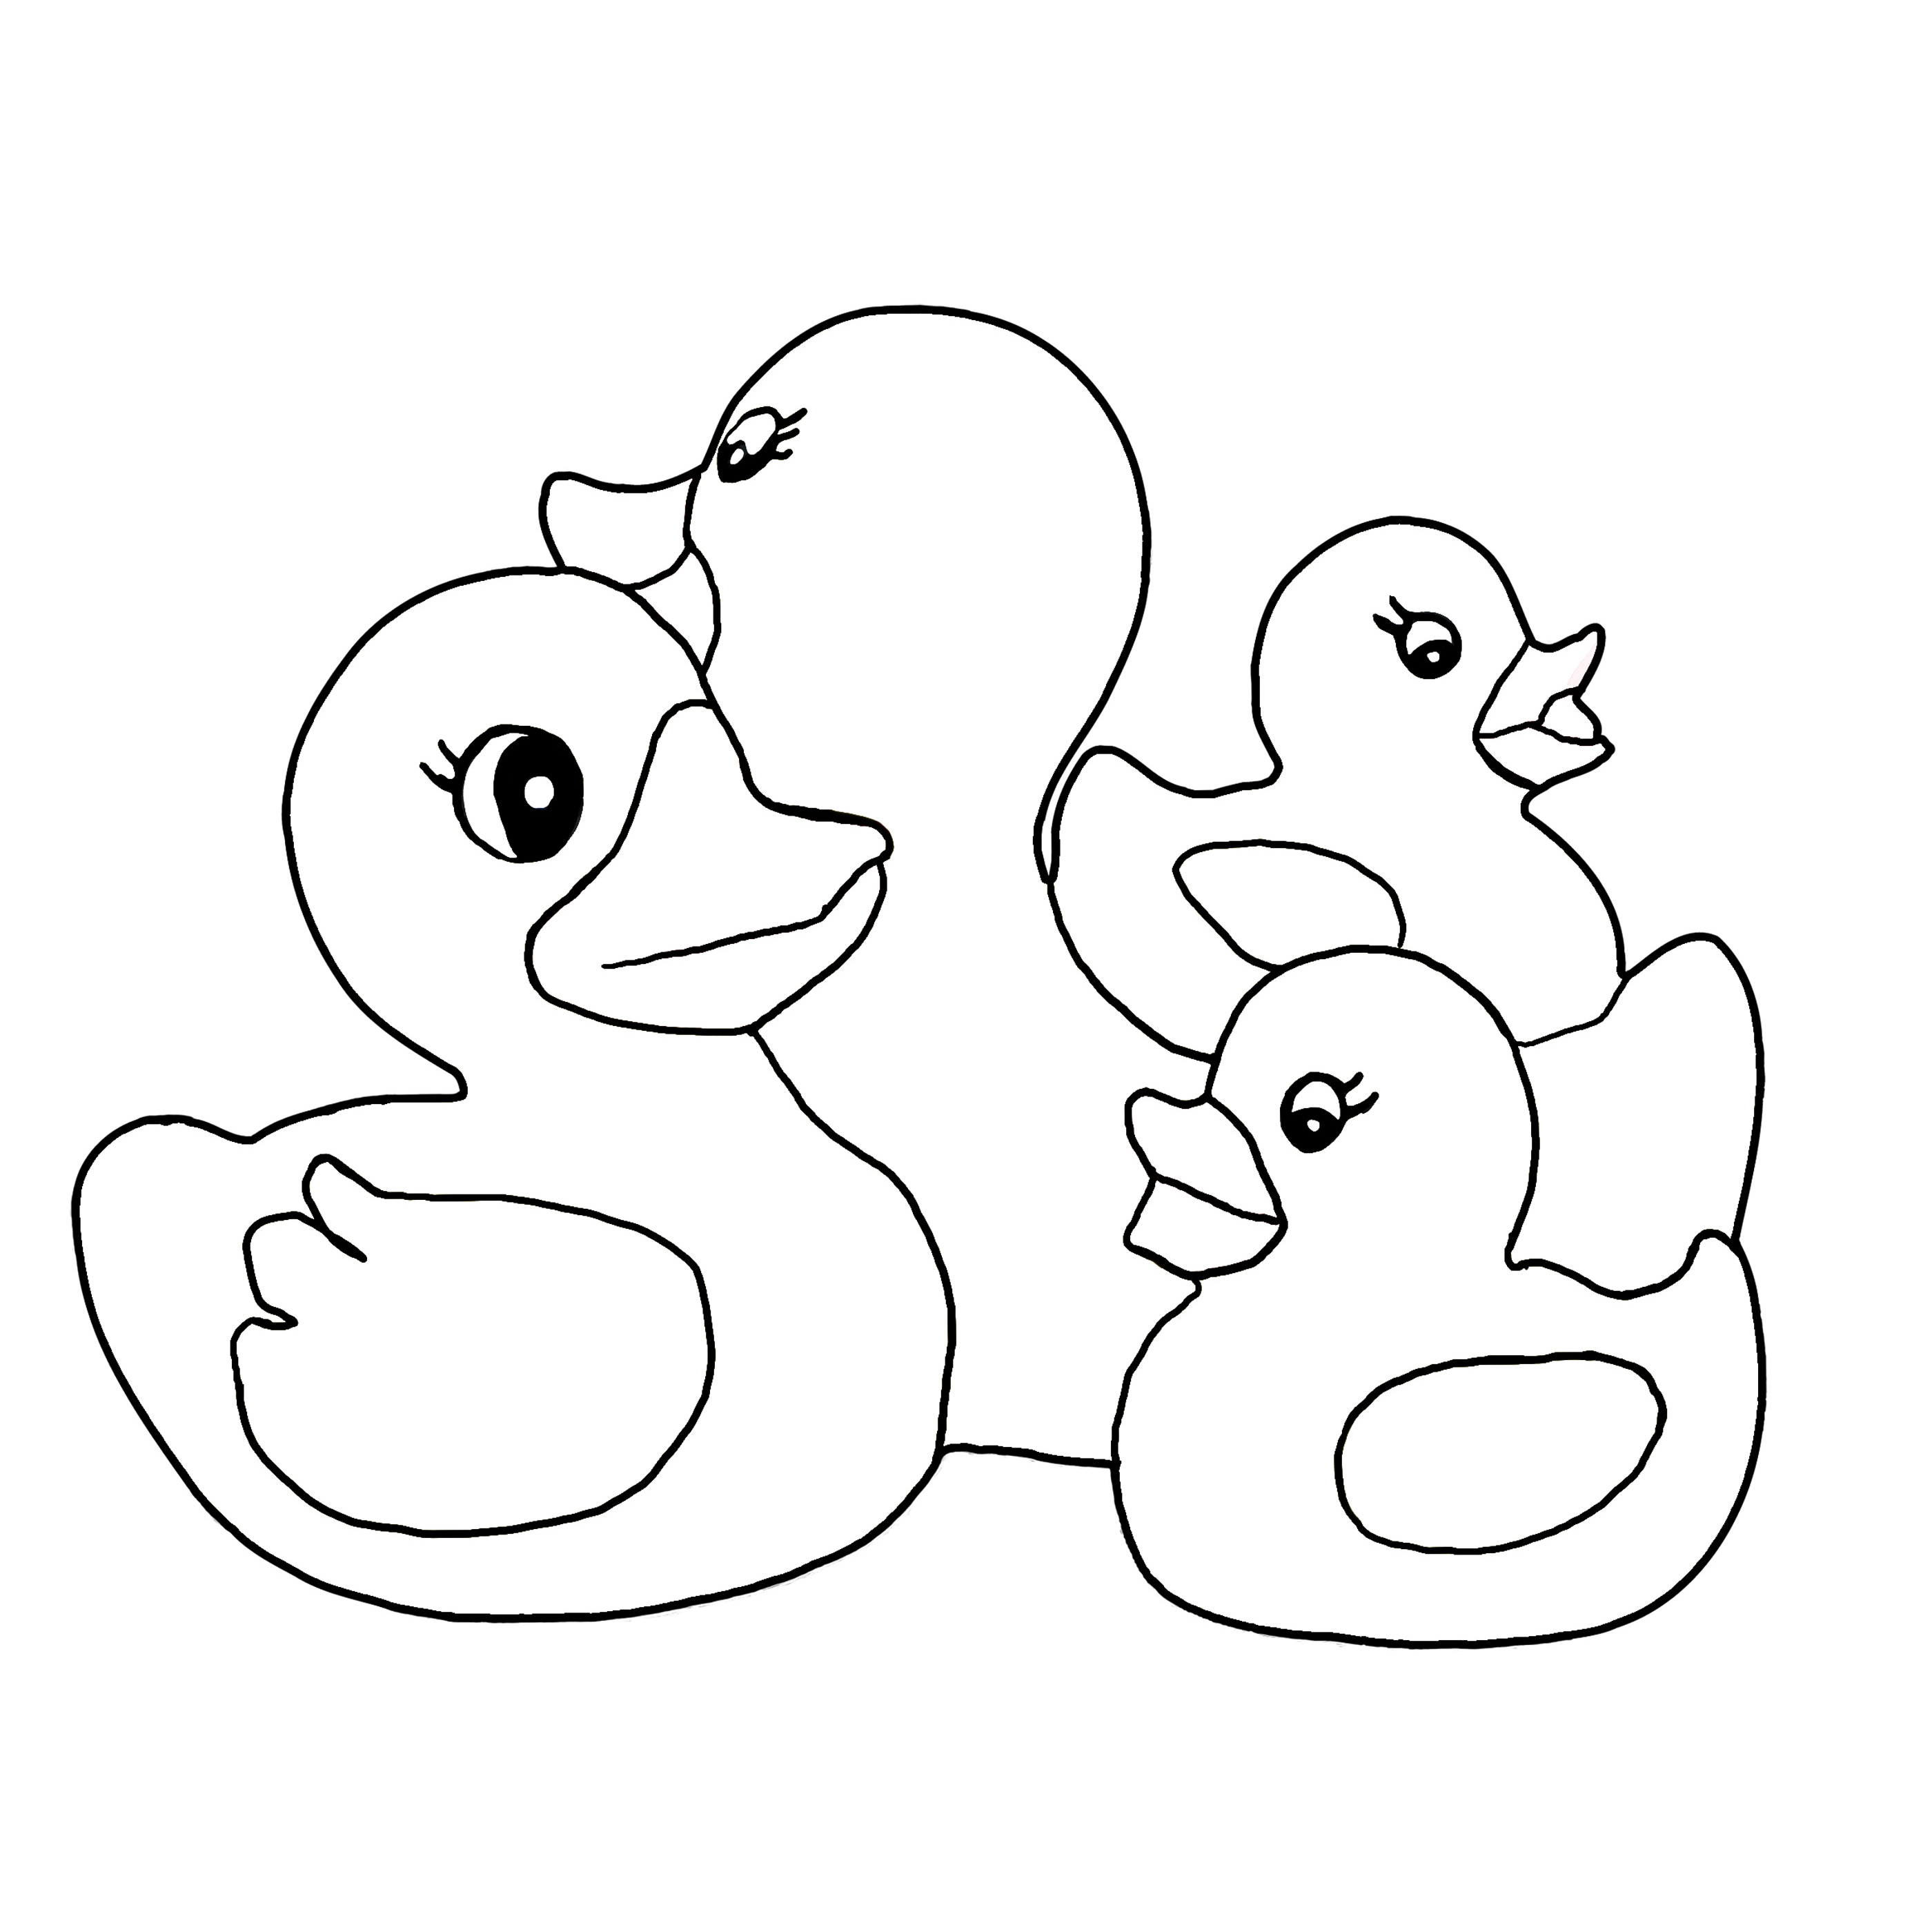 Free Printable Duck Coloring Pages For Kids  Animal Place